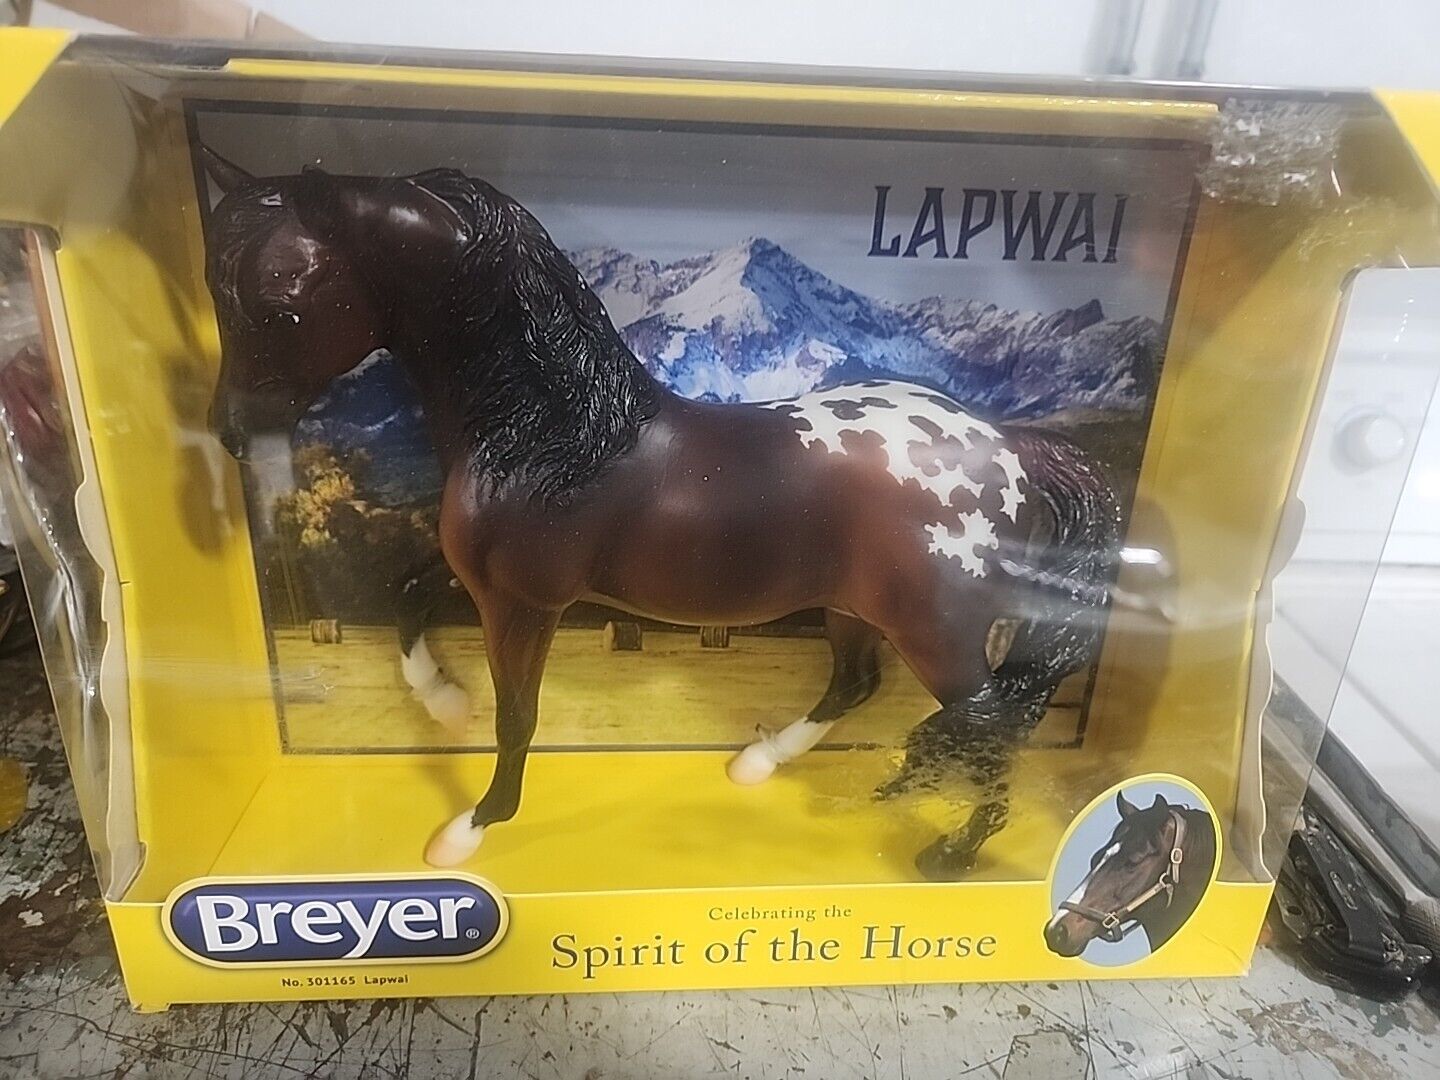 2020 Breyer Lapwai TSC Exclusive Spirit of The Horse  Set # 301165  READ SEE PIC